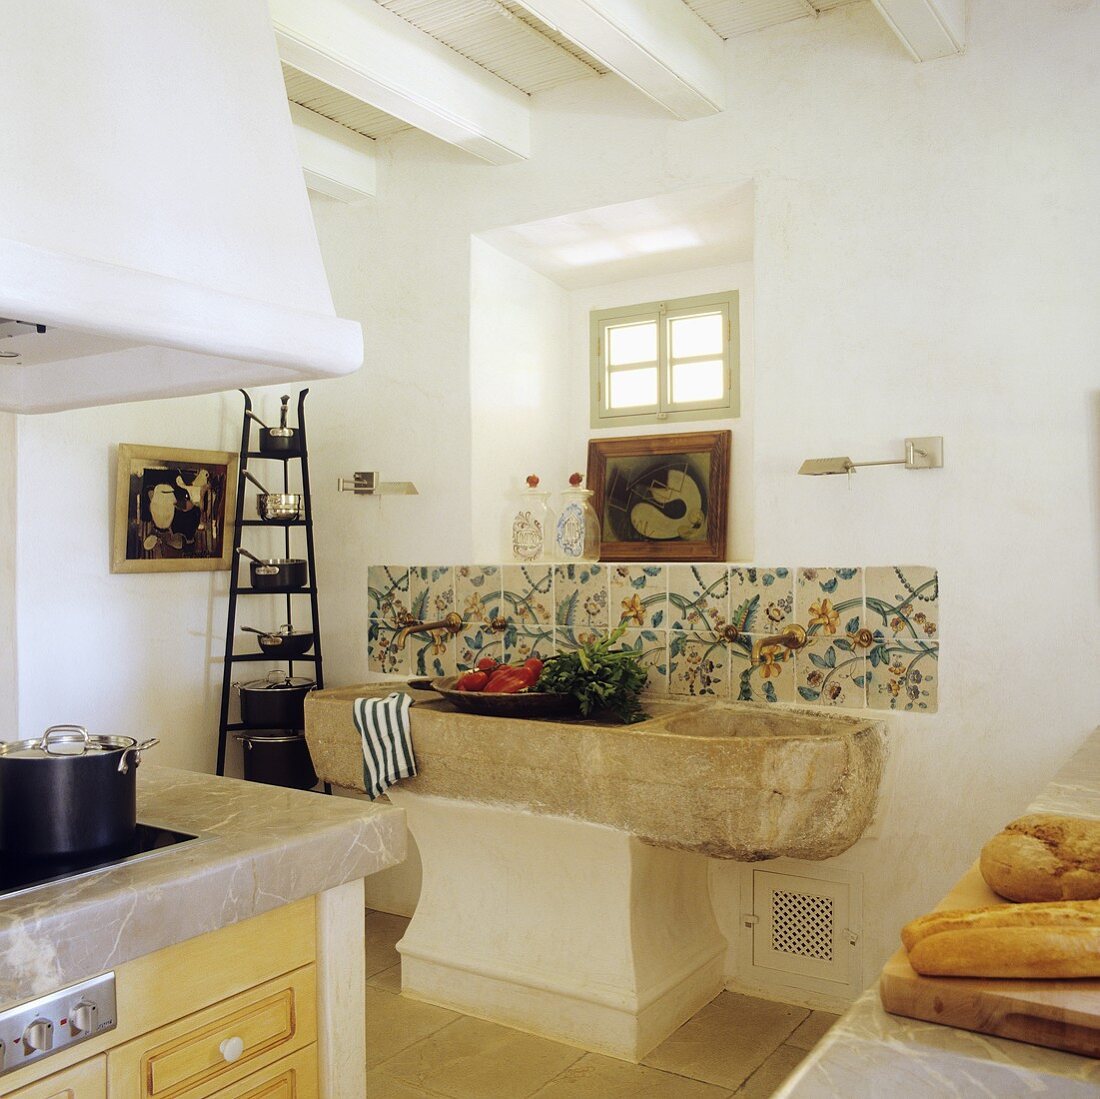 A rustic stone sink in the kitchen of a Spanish country house